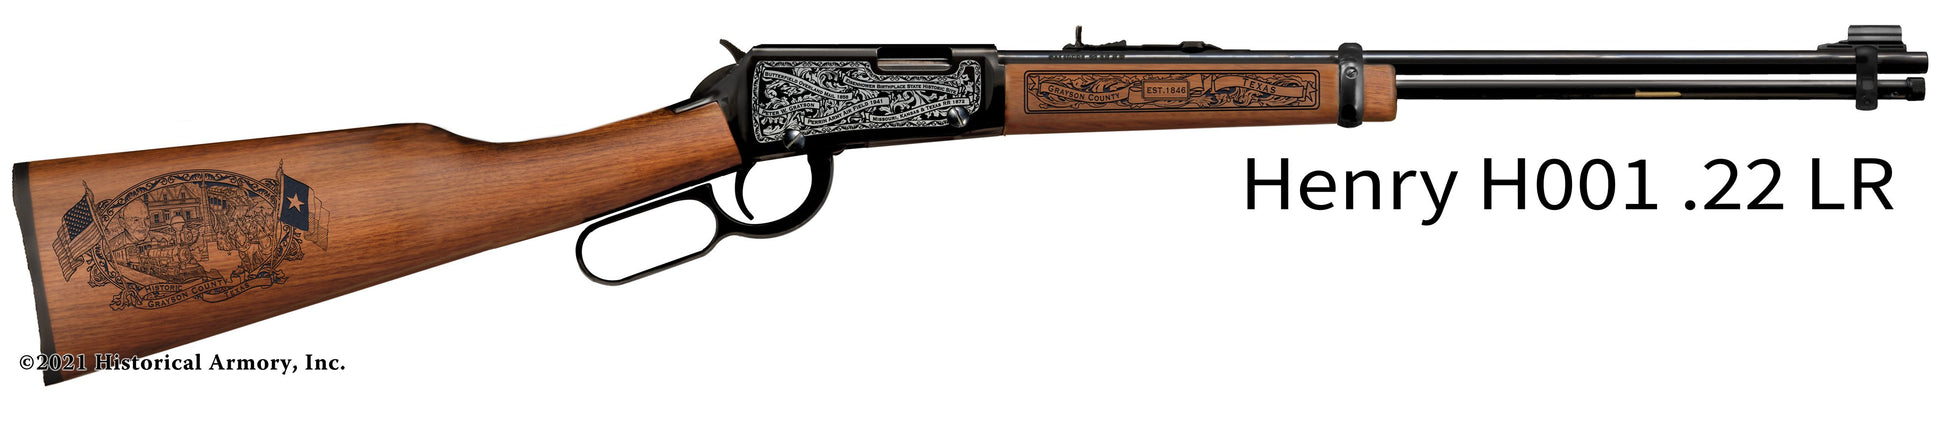 Grayson County Texas Engraved Henry H001 Rifle